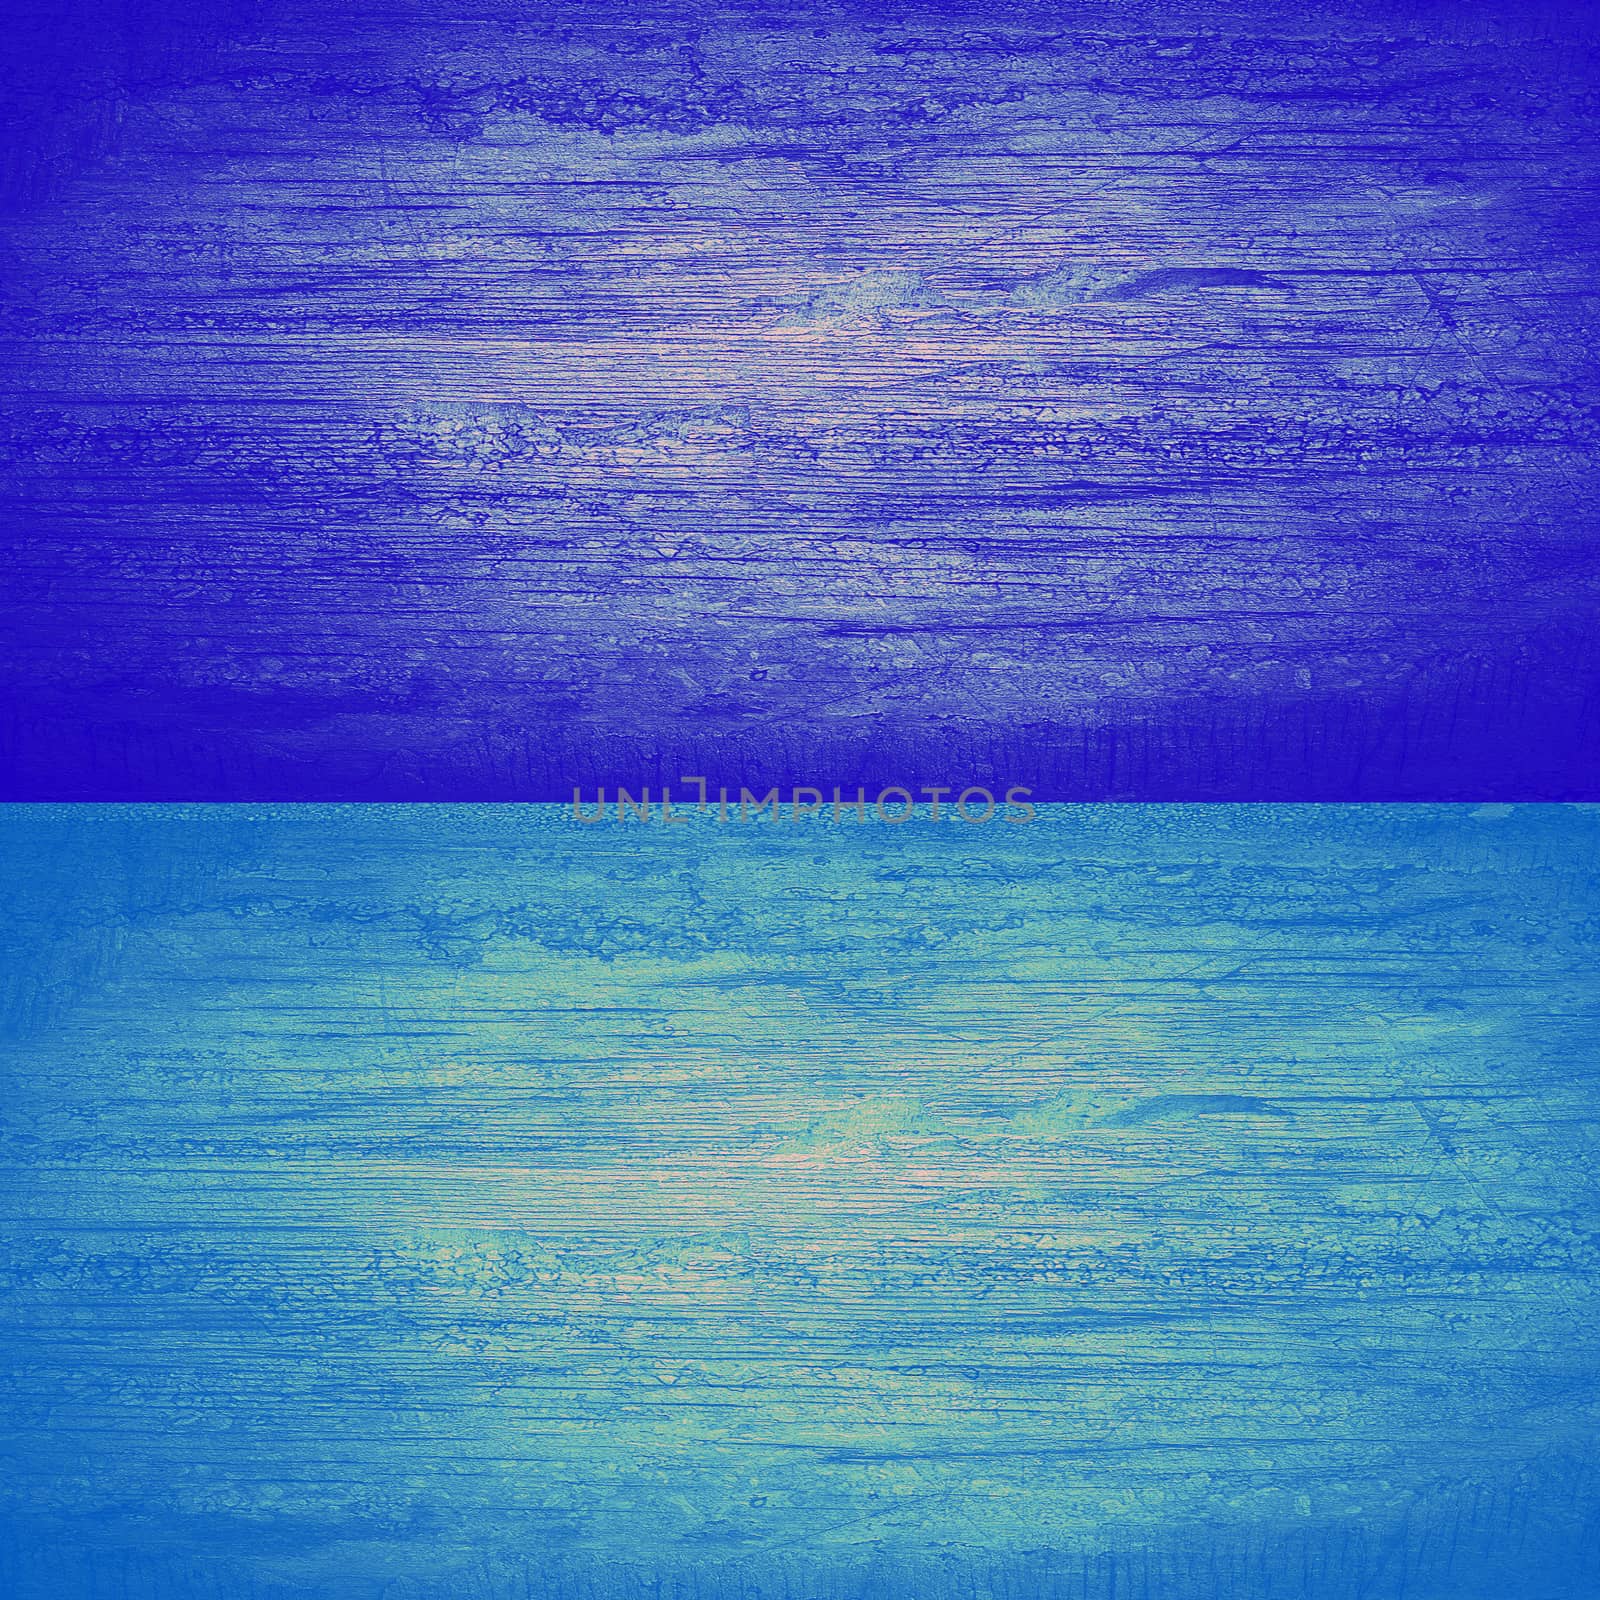 Blue wooden texture background of old grunge wood